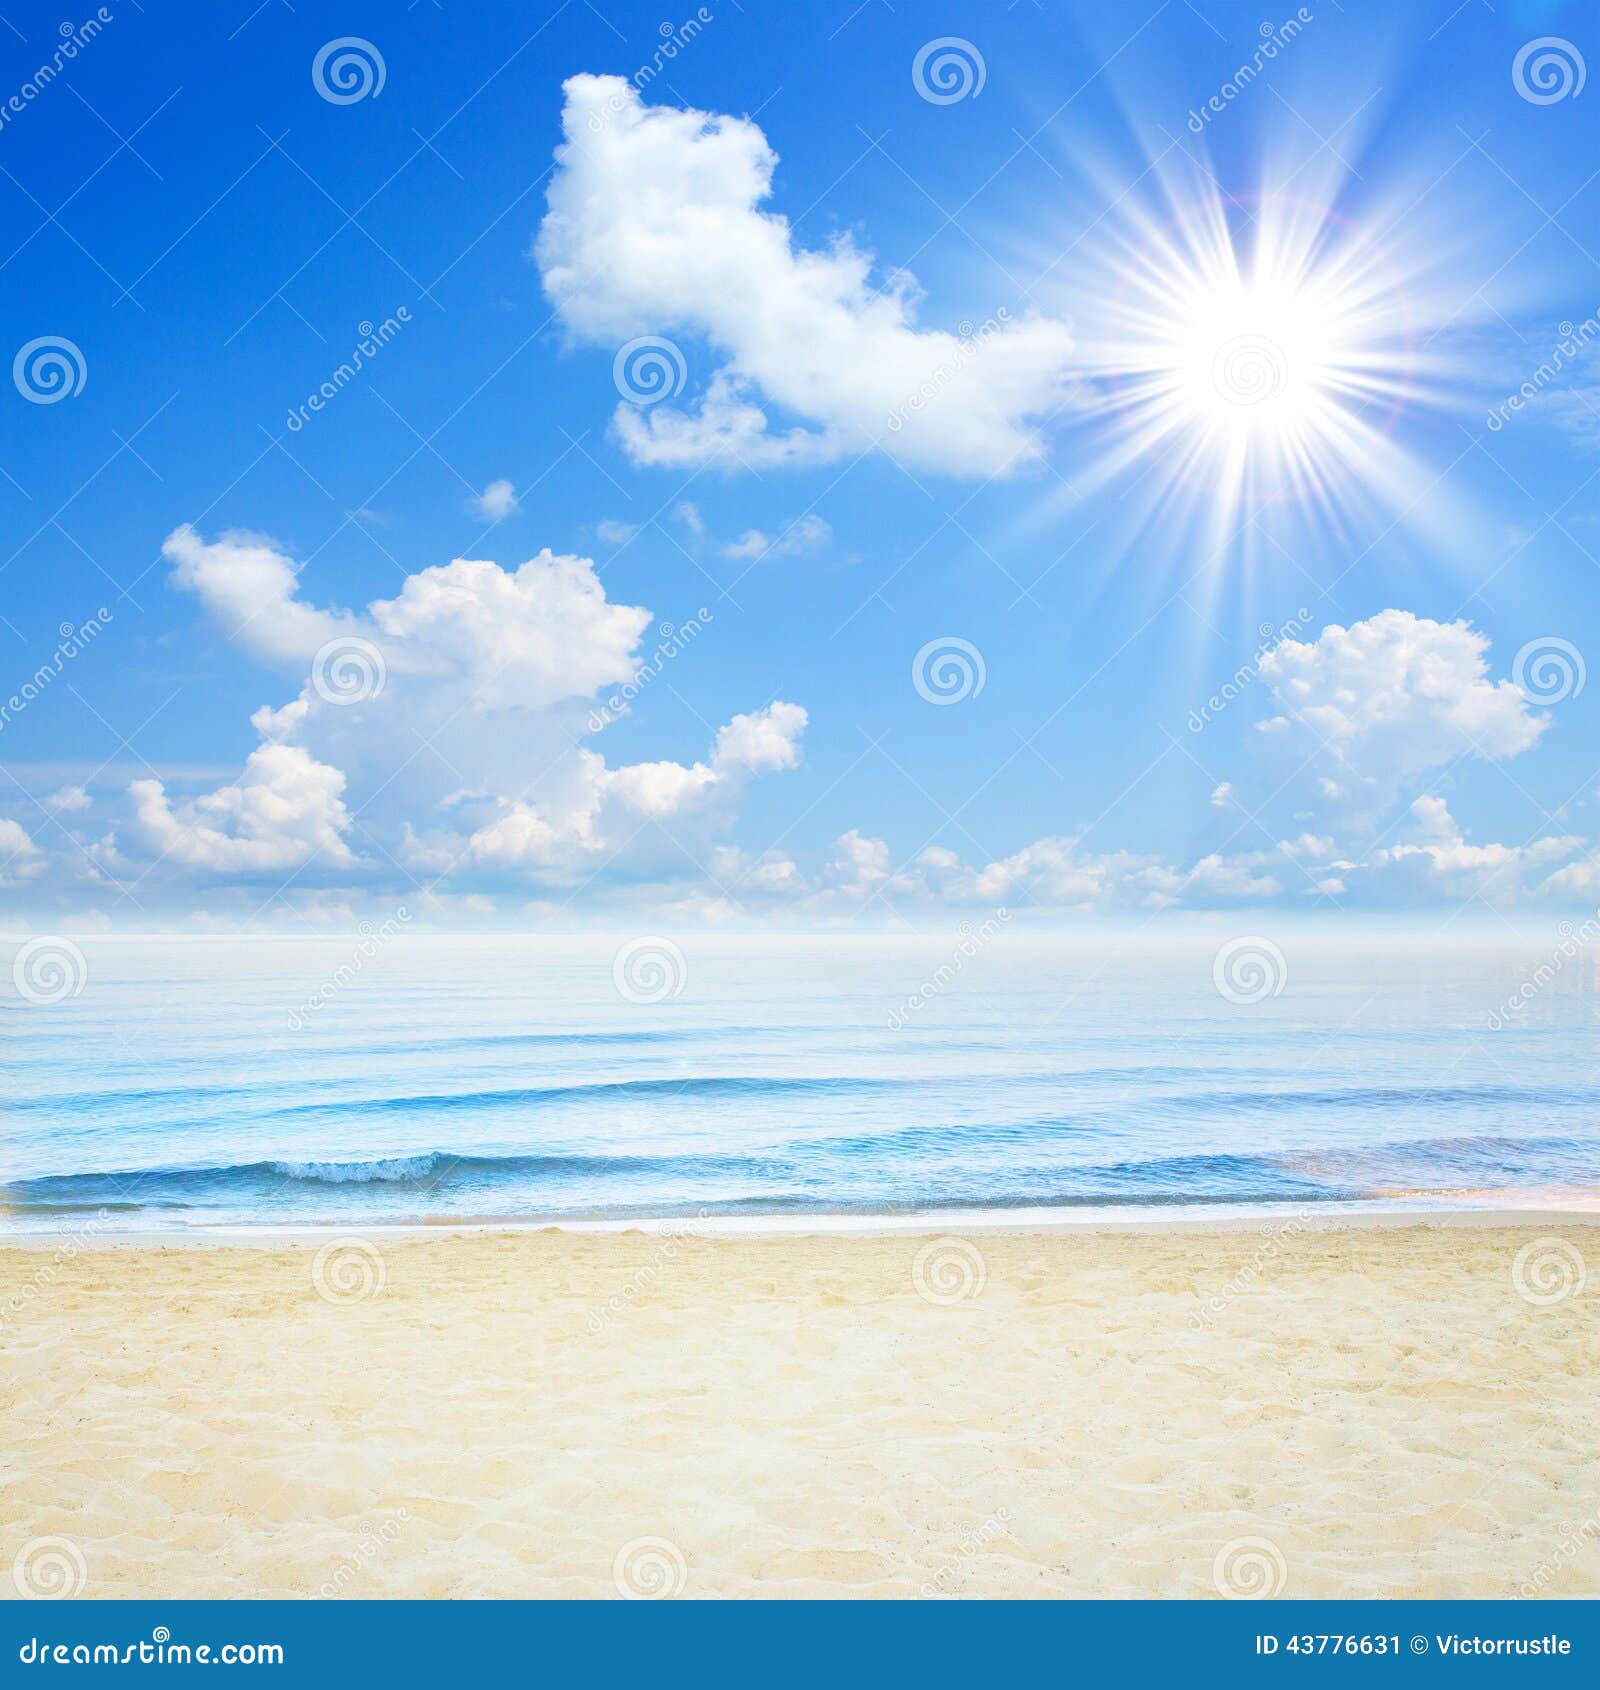 Sea Background Images, HD Pictures and Wallpaper For Free Download | Pngtree